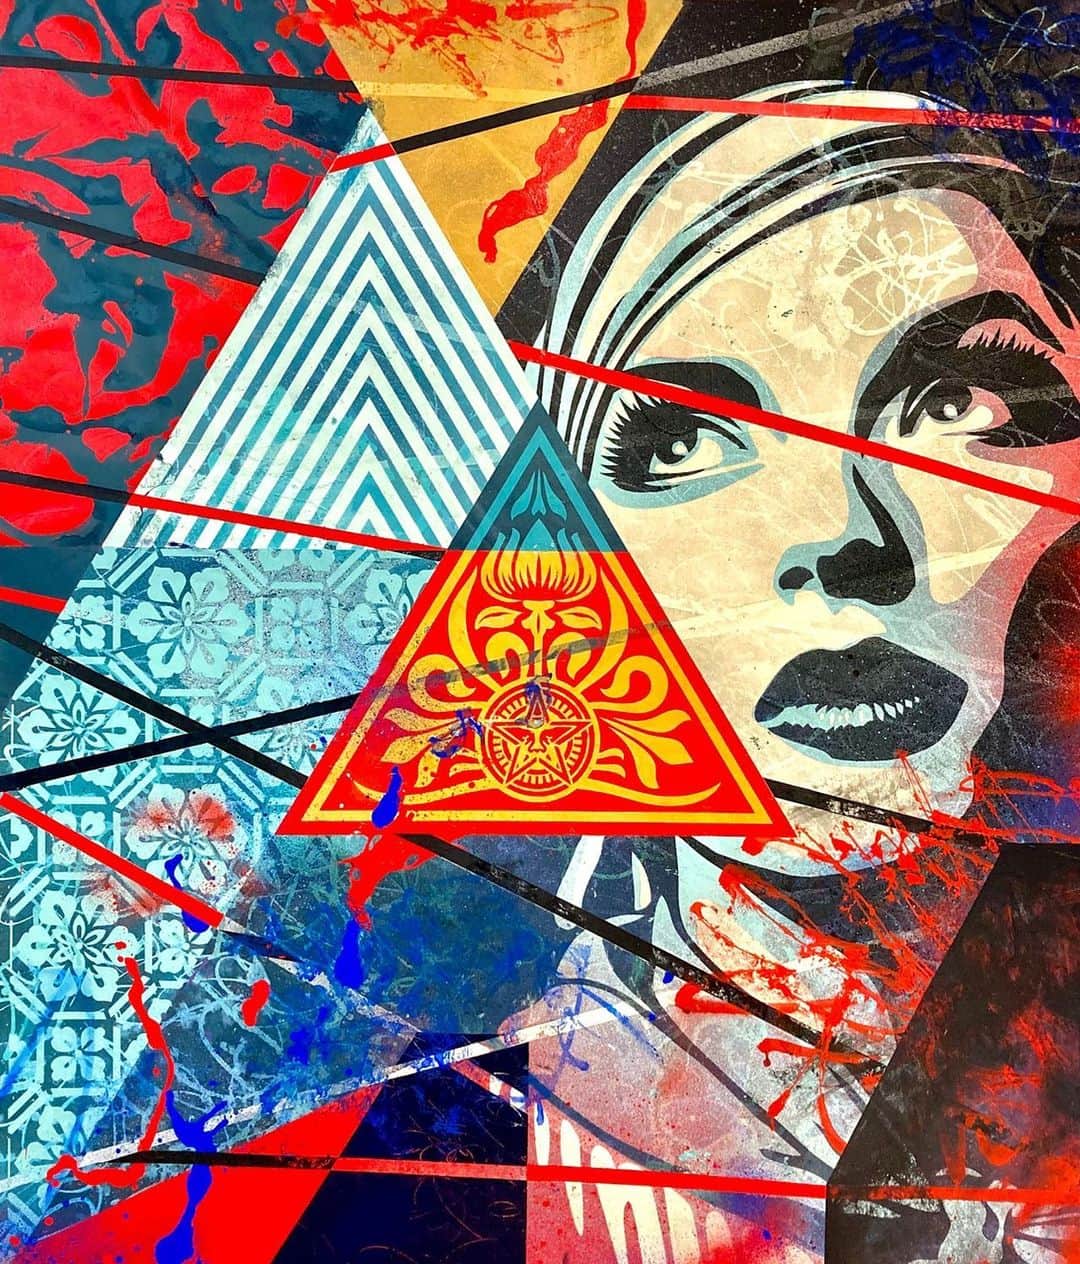 Shepard Faireyさんのインスタグラム写真 - (Shepard FaireyInstagram)「My gallery @subliminalprojects is pleased to present The Versus Project IV, an international traveling group exhibition co-curated by the German artist duo Layer Cake (@layercake_hundertmarkhartl), individually known as graffiti veterans Patrick Hartl (@stylefighting) and Christian Hundertmark (@c100atelier). The show challenges the well-known Graffiti rule: never paint over other writers, by inviting the broader graffiti and street art community to do just that. The collaborative works result in layers of each artist's contribution that both blend and highlight their personal styles.⁠ ⁠ This show concept is very appealing to me not only because I love Layer Cake’s art and collaborating with other artists, but also because Layer Cake’s approach harnesses the charm of what organically and chaotically happens to art on the streets as weather and other forces degrade/evolve the original creation.⁠ ⁠ Join us Saturday, September 16th, 6-10 PM for the Opening Reception. To kick off the reception the gallery will host a special Artist Talk at 6:15 PM with Layer Cake, featuring @chaz_bojorquez and myself, moderated by Steven P. Harrington co-founder of Brooklyn Street Art (@bkstreetart). RSVP to rsvp@subliminalprojects.com to attend. Link in bio for more information!⁠ –Shepard⁠ ⁠ CONTRIBUTING ARTISTS⁠ ⁠ AKTE ONE (@akte_one), Bond Truluv (@bondtruluv), Carolina Falkholt (@carolinafalkholt), Chaz Bojórquez (@chaz_bojorquez), Cren (Michel Cren Pietsch)(@cren_art), CRYPTIK (@_cryptik_), Dave the Chimp (@davethechimp), Flying Förtress (@flyingfortress5410), Formula76 (formula76), HERA, HNRX (@hera_herakut), Layer Cake (@layercake_hundertmarkhartl), MadC (@mad_c1), MAMBO (Flavien Demarigny) (@mambo.vu), Matthias Edlinger (@edlinger_did_it), Łukasz Habiera NAWER (@n_nawer), Peter "Paid" Levine (@peterpaidnyc), Rocco & His Brothers (@rocco_and_his_brothers), Shepard Fairey (@obeygiant), Various and Gould (@variousandgould), and Zepha (Vincent Abadie Hafez) (@zepha1).」8月31日 4時06分 - obeygiant